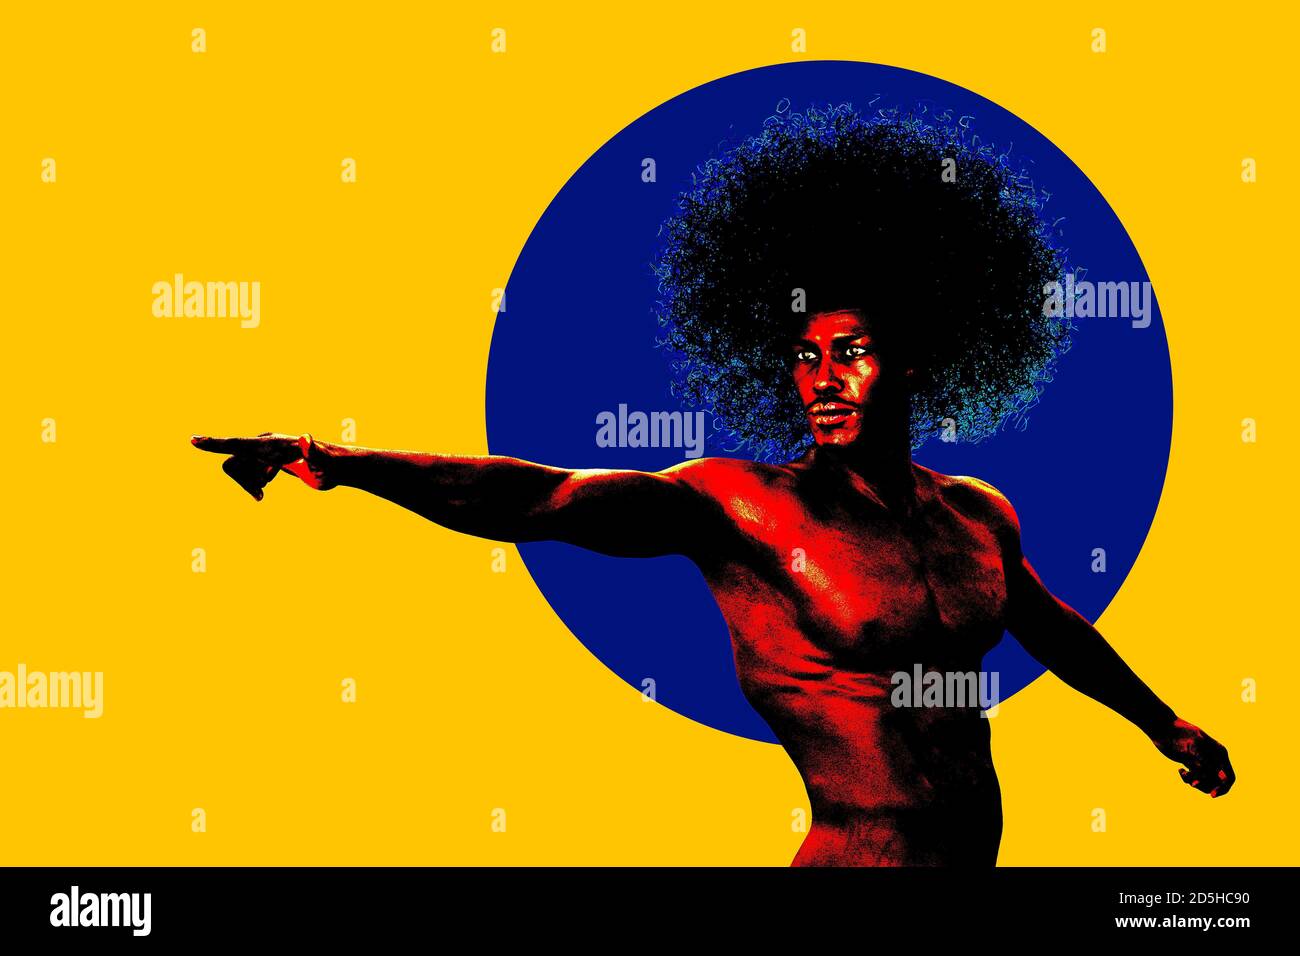 Man with afro hair pointing, CGI figure no release required Stock Photo